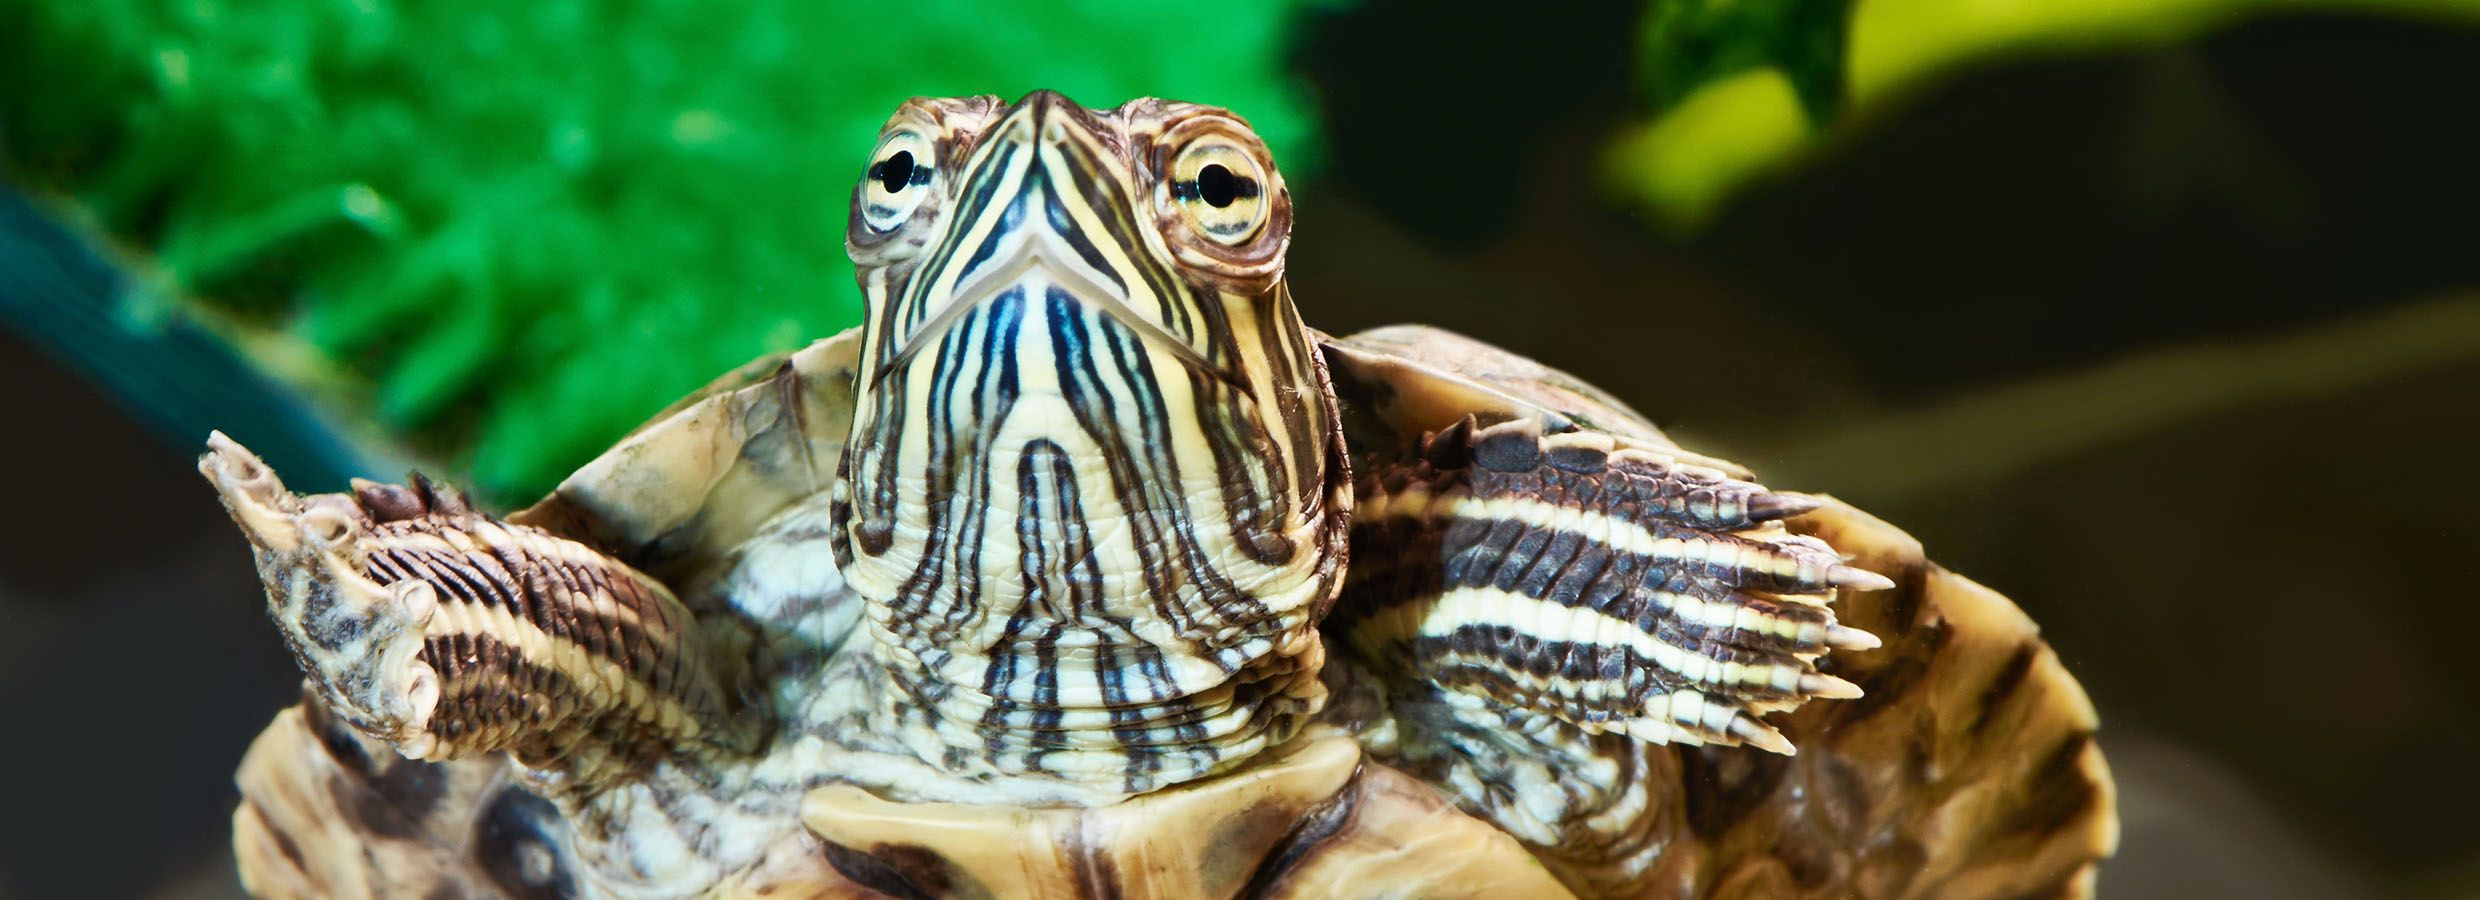 places to buy a tortoise near me